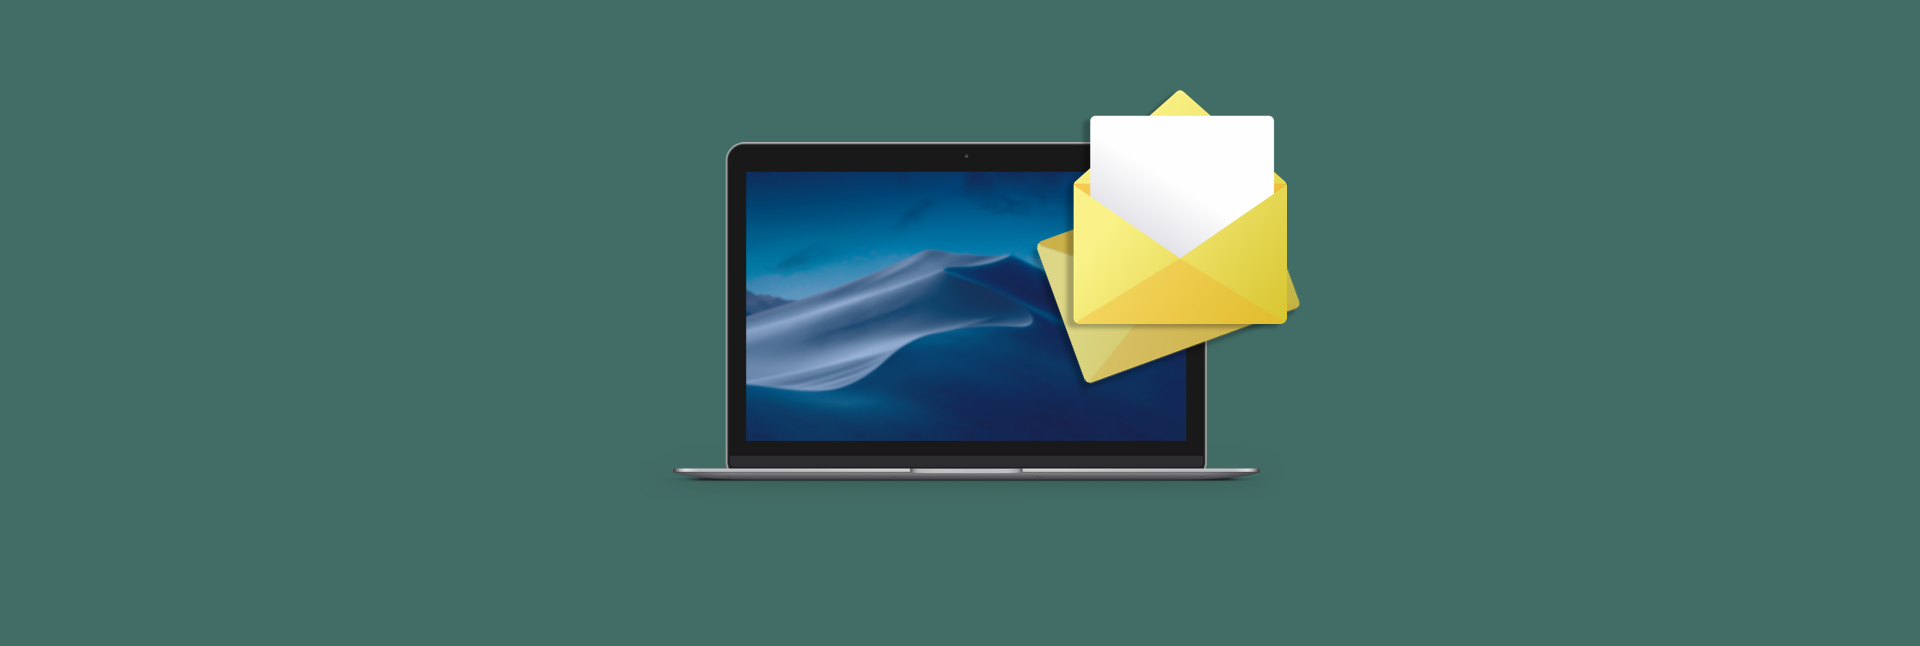 gmail.com vs email client for mac